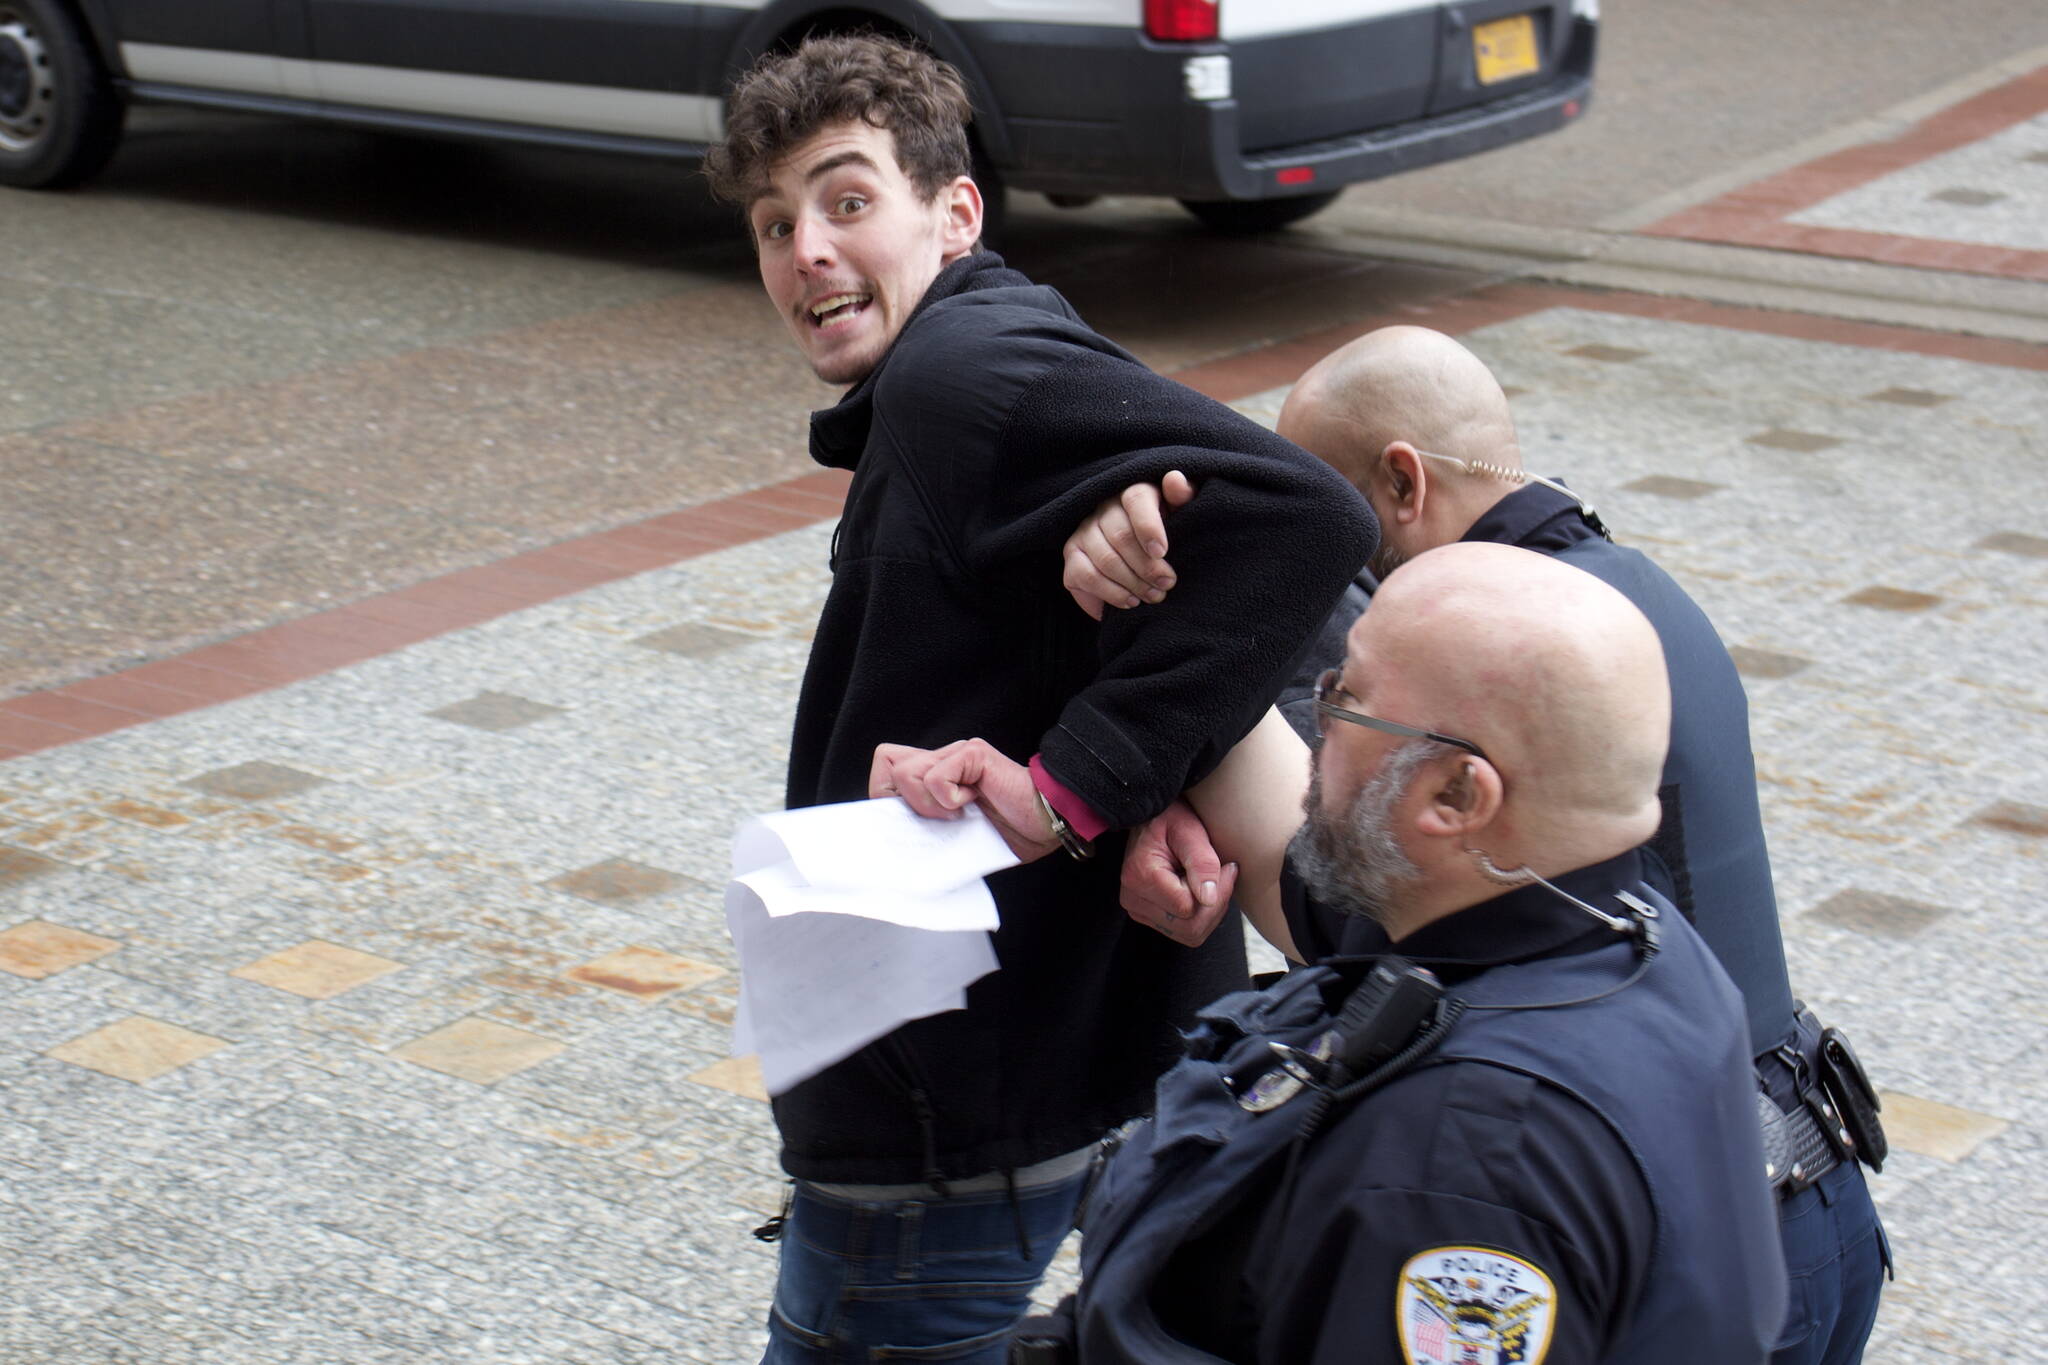 Mark Sabbatini / Juneau Empire
Eric Osuch tries to offer papers related to his arrest in front of the Alaska State Capitol on Monday, April l17, 2023, to a reporter as Juneau Police Department officers escort him to a nearby patrol vehicle. Osuch, who was staging a solo protest about fisheries bycatch policies, was banned from the Capitol after causing a public disruption and was arrested a short time later for another alleged disturbance inside the State Office Building.